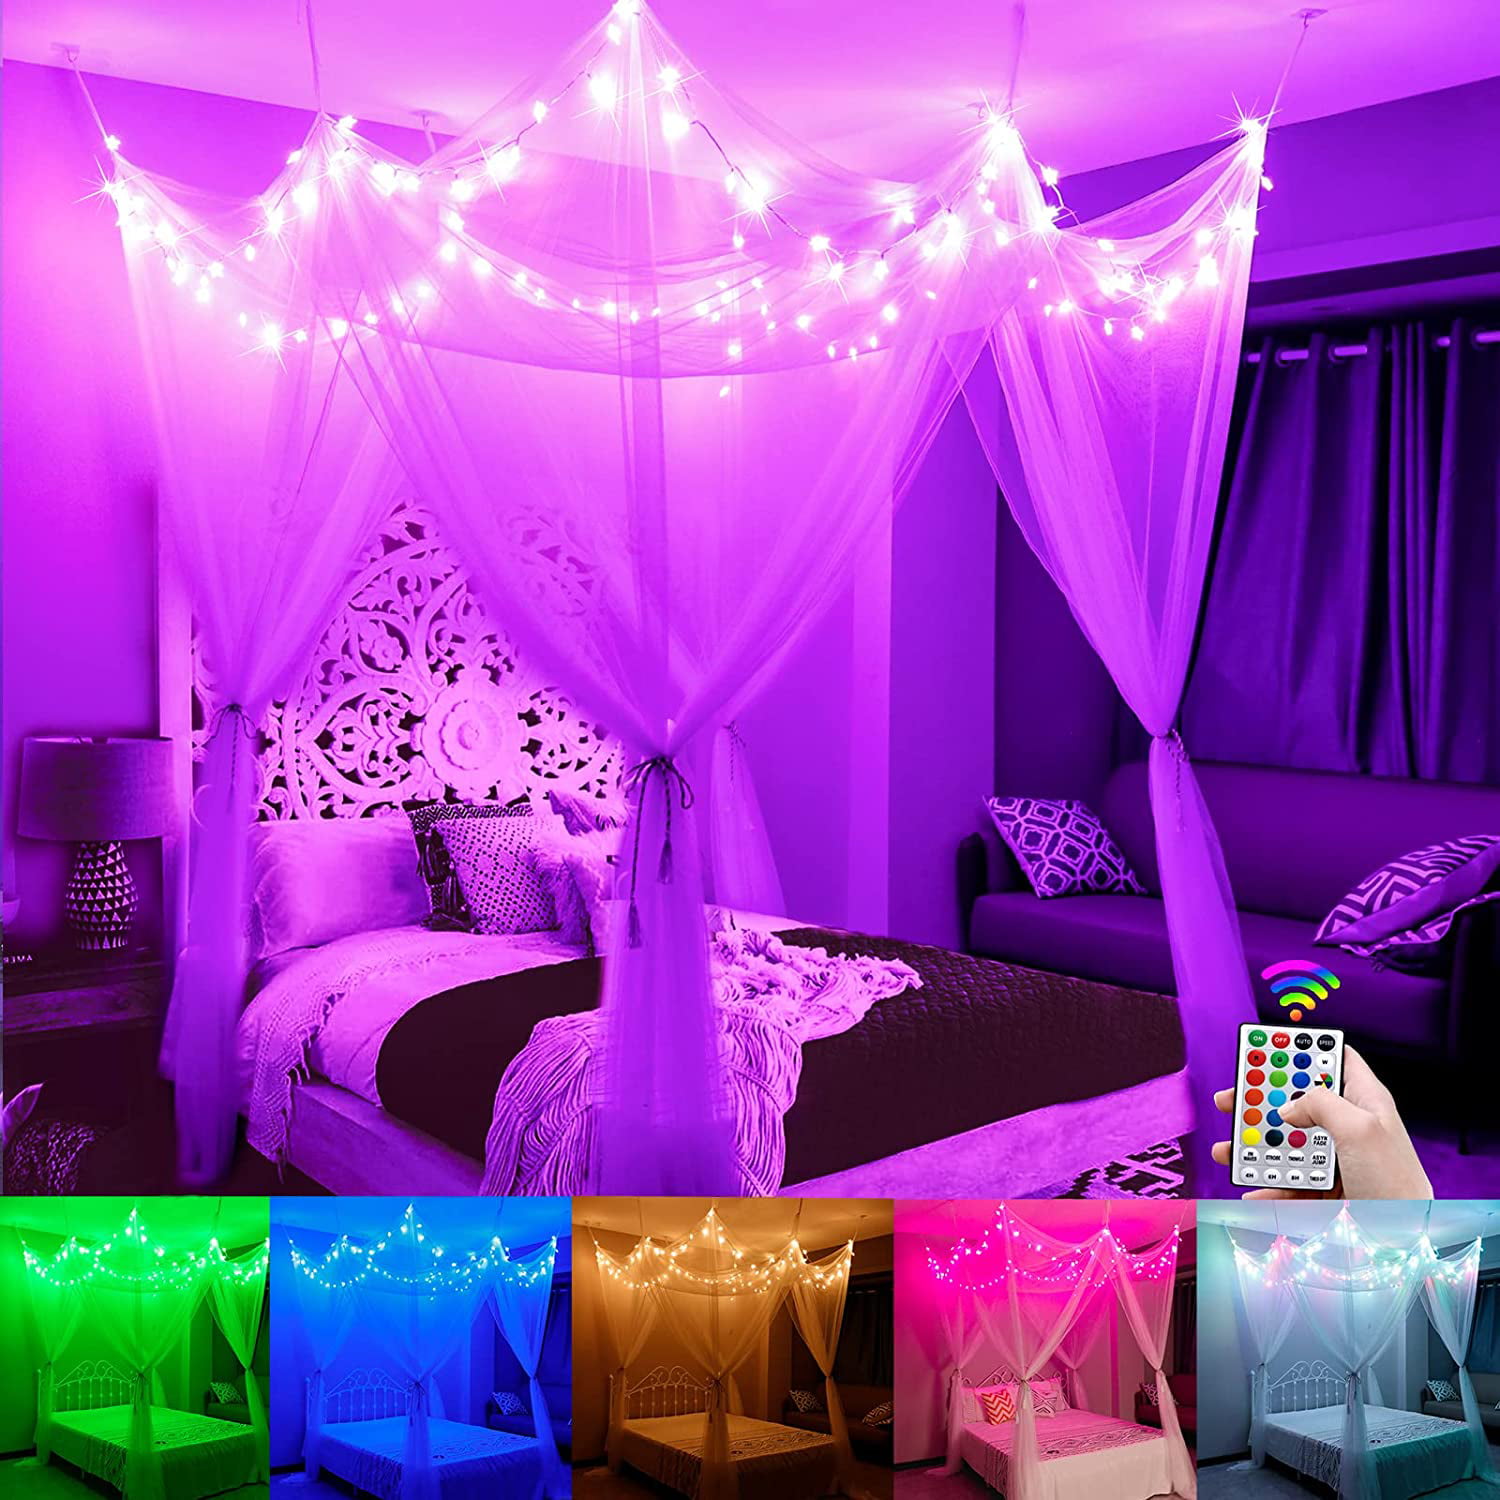 Girls Or Adults Topyuan Princess Mosquito Net for Bed 4 Colors LED Sting Lights Canopy Bed Curtain Netting for Baby Kids 1 Entry,for Single to King Size Beds